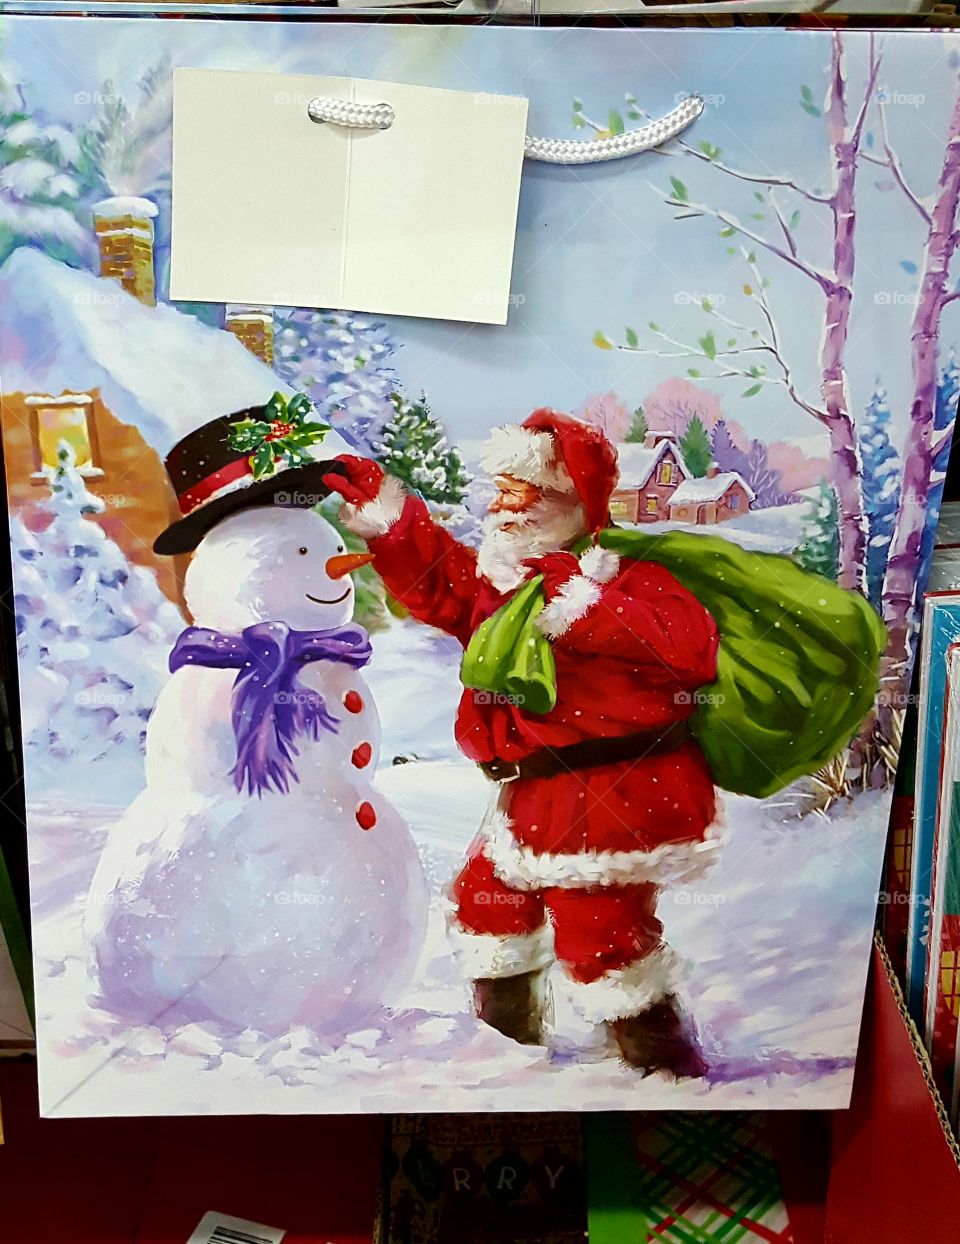 Now here's a classic-looking Santa and Frosty combo. Very cool looking!